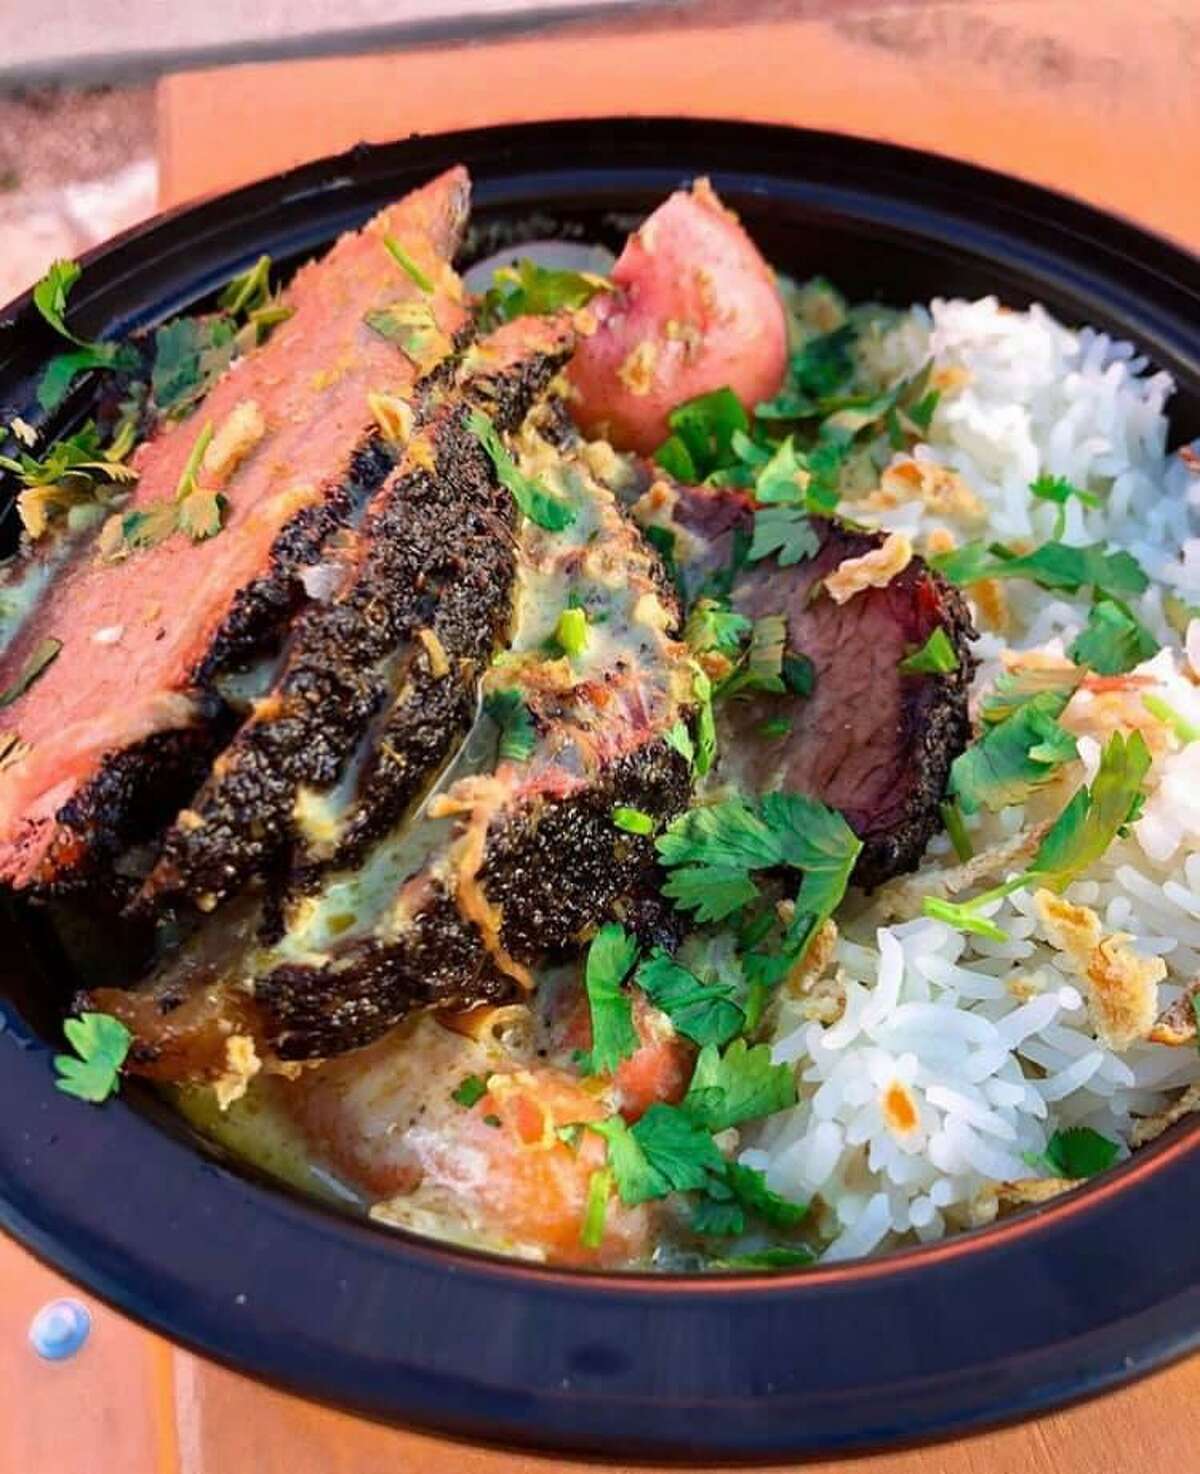 Curry Boys BBQ is now serving Southeast Asian rice bowls topped with Texas-style smoked meats.